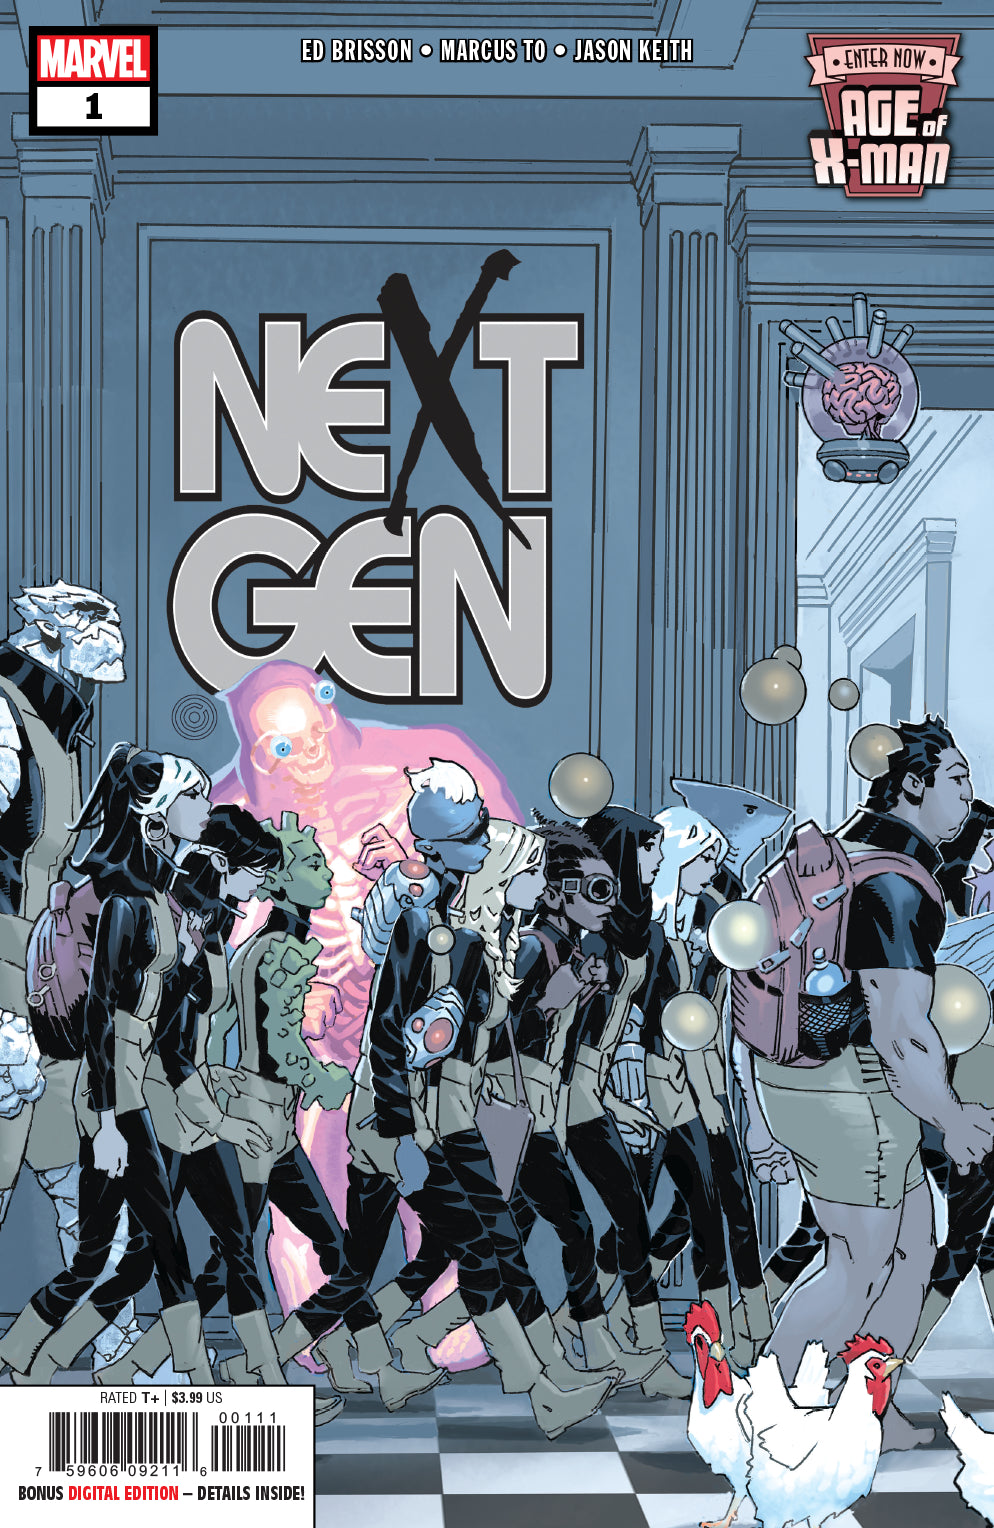 AGE OF X-MAN NEXT GEN #1 (OF 5) COVER